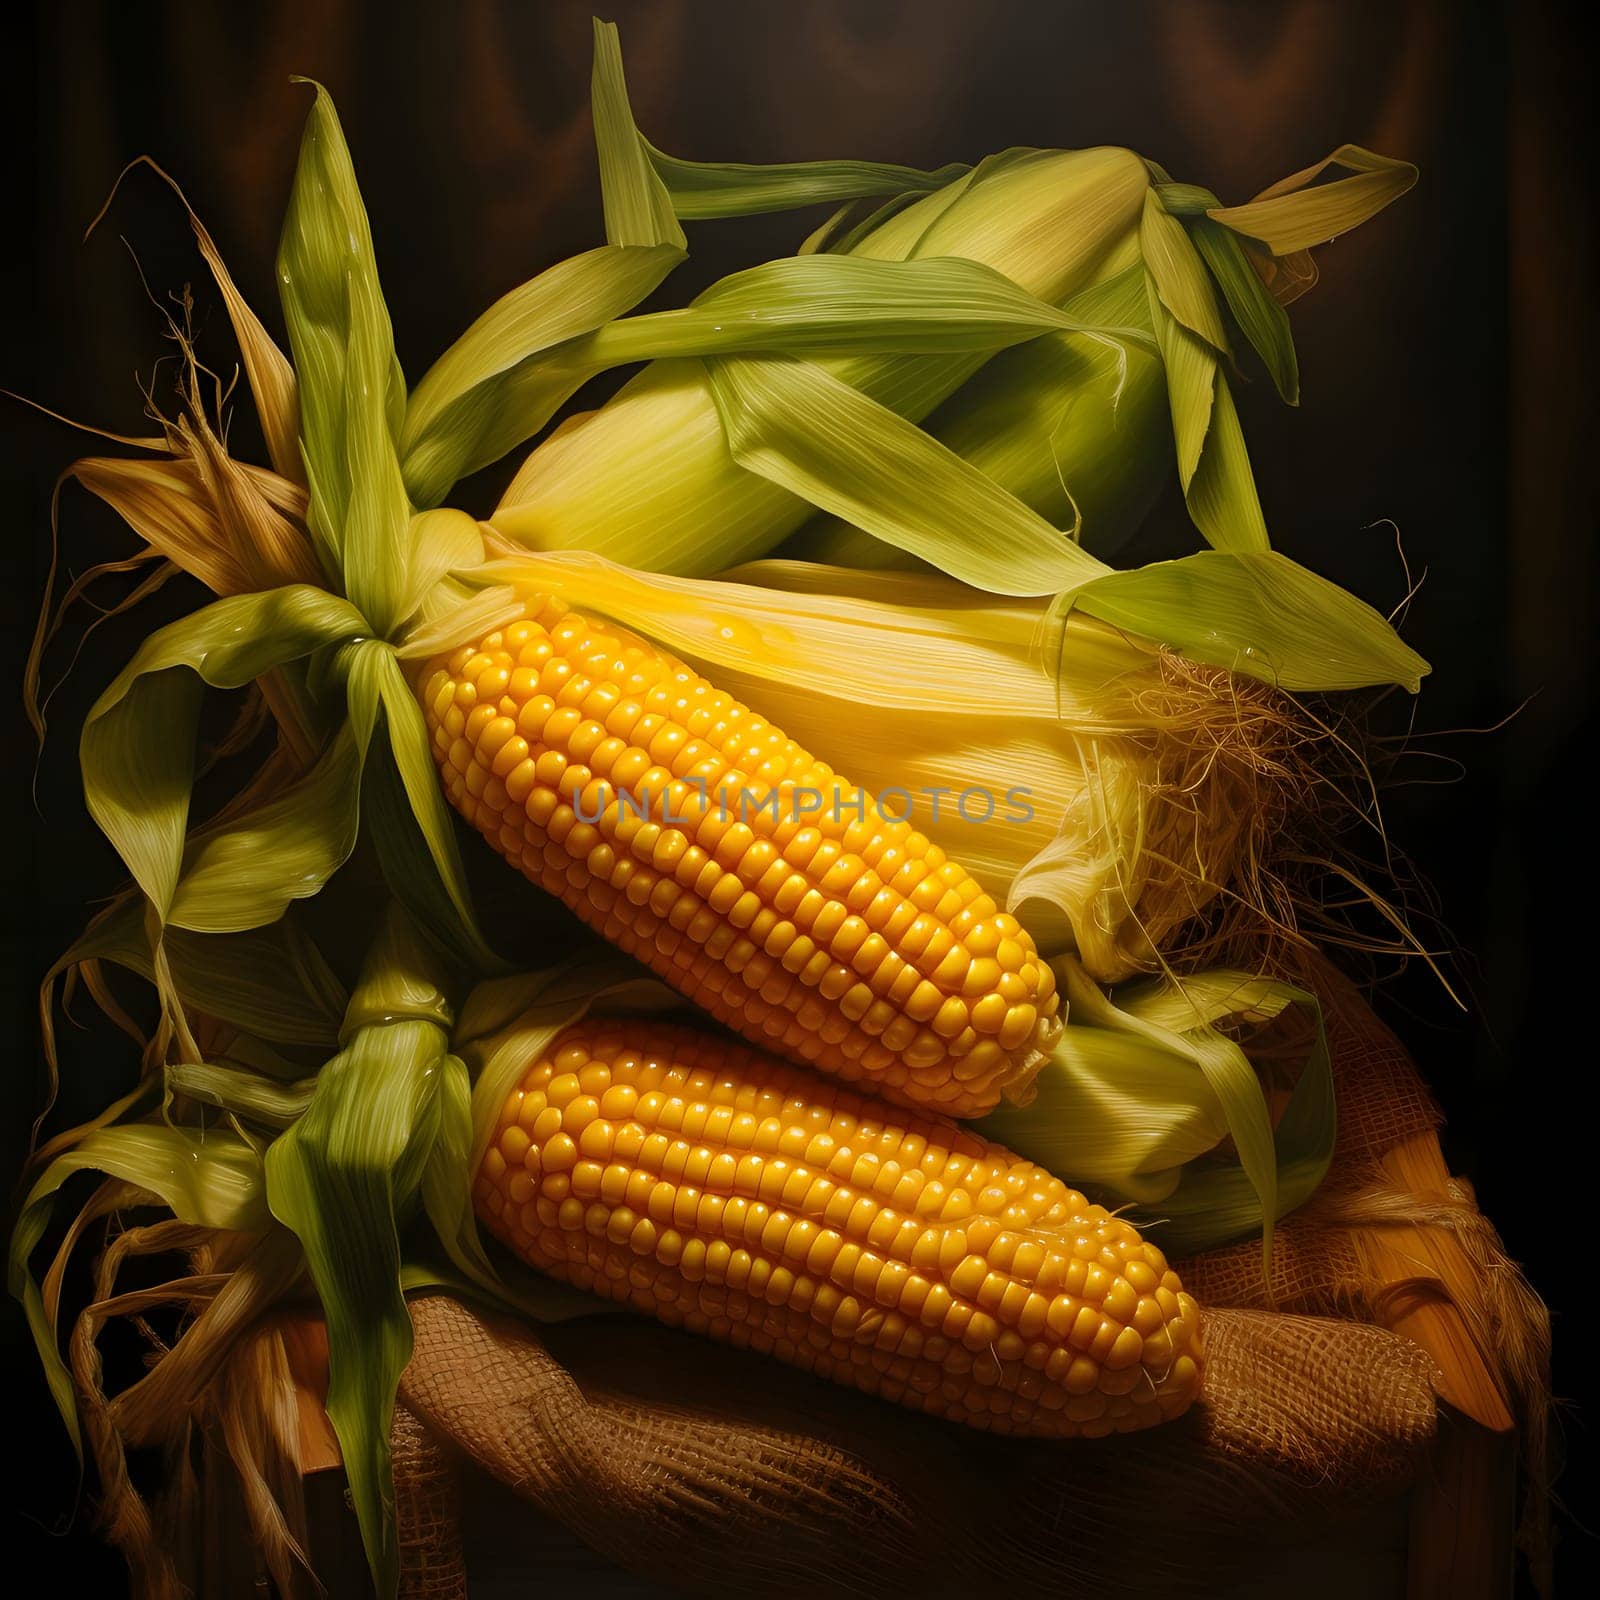 Yellow corn cobs, elegantly arranged. Corn as a dish of thanksgiving for the harvest. An atmosphere of joy and celebration.